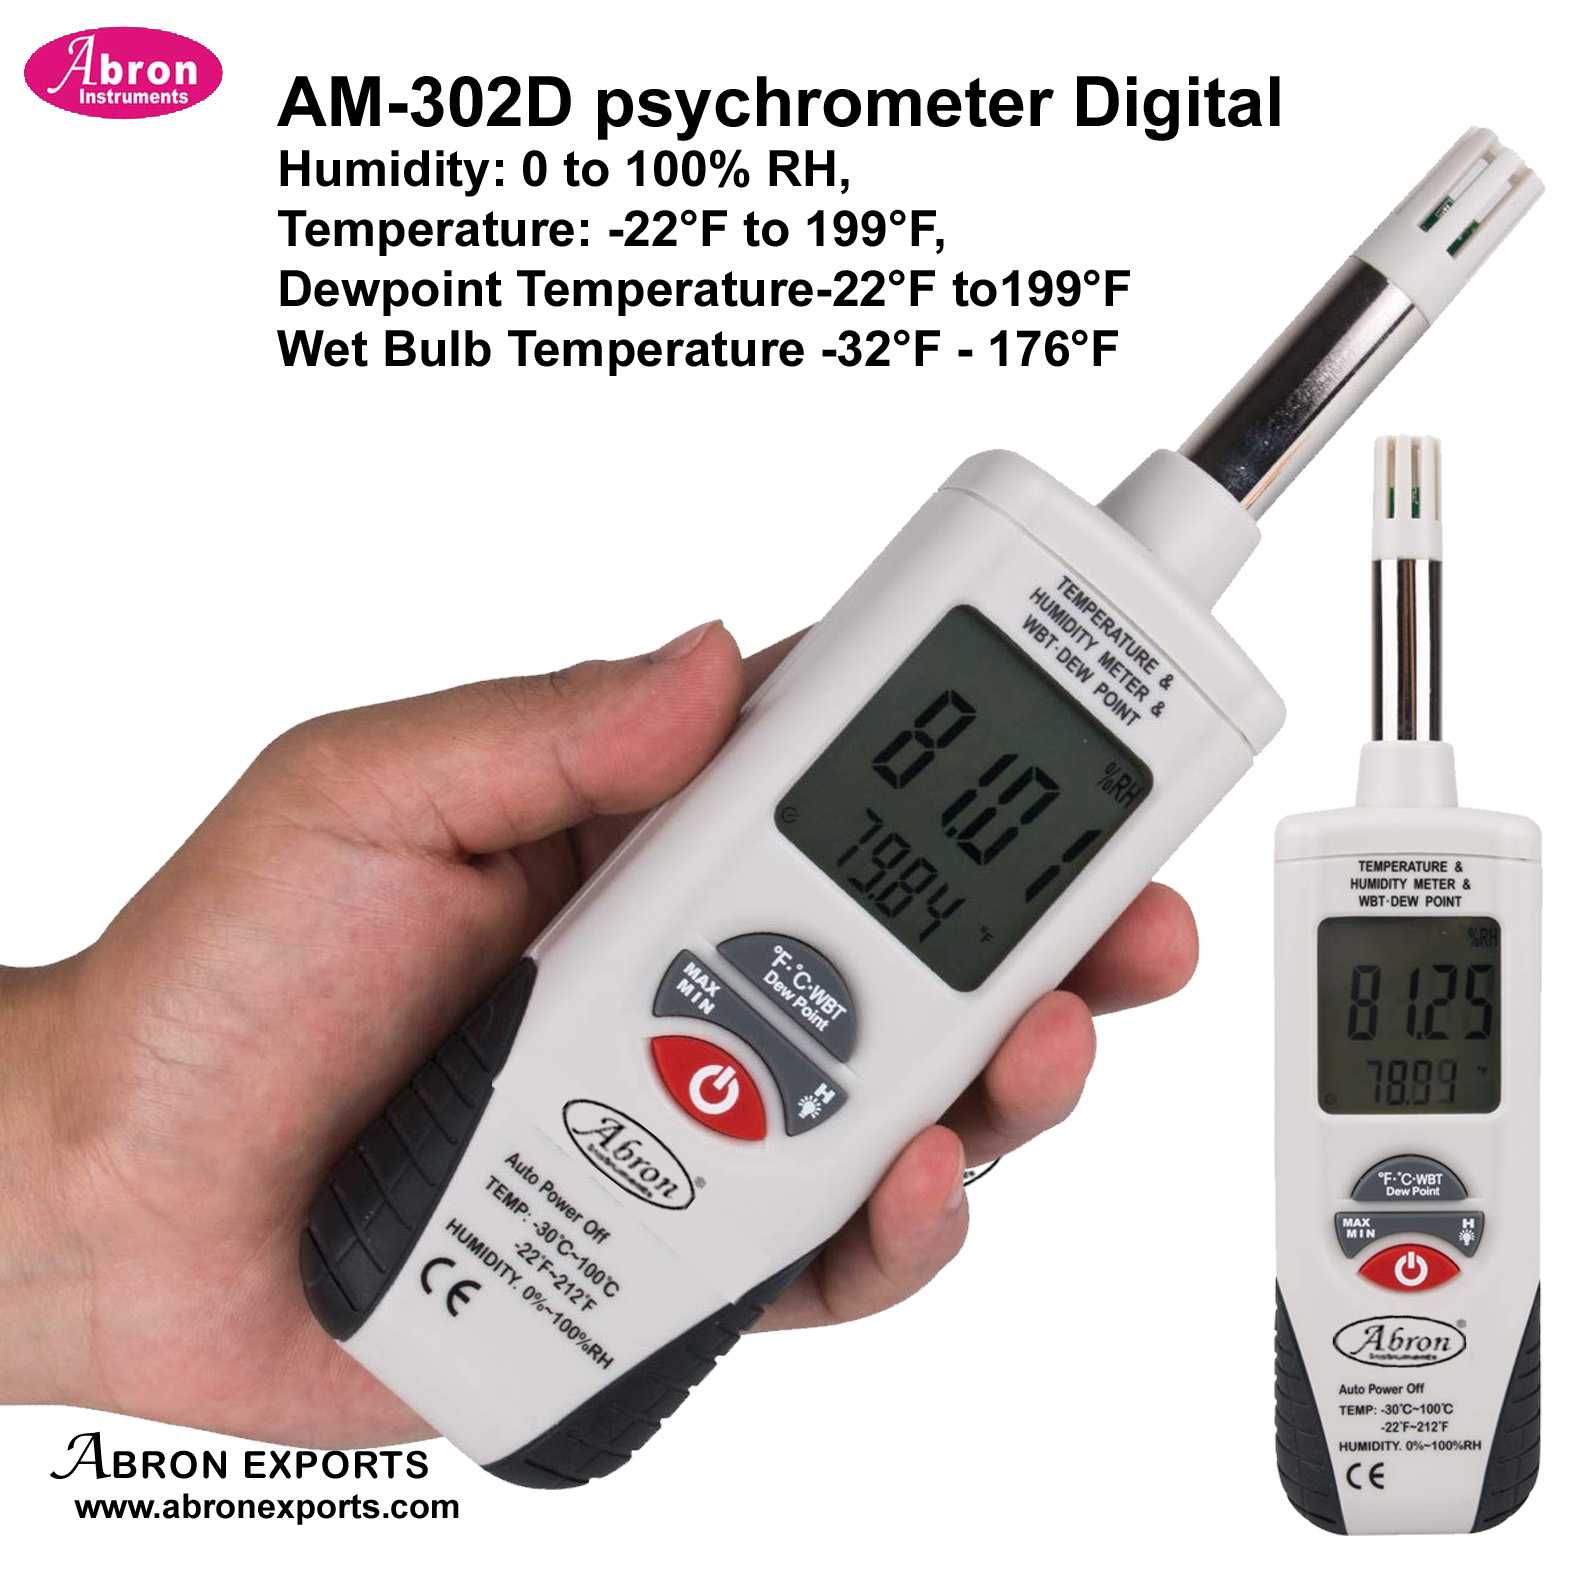 Psychrometer Digital Hygrometer Thermometer Wetand dry Conditions humidity 0-100 percentage -RH  -22Fto199F Dewpoint  Temperature -22Fto199F -32F - 176F  meteorology Abron AM-301D